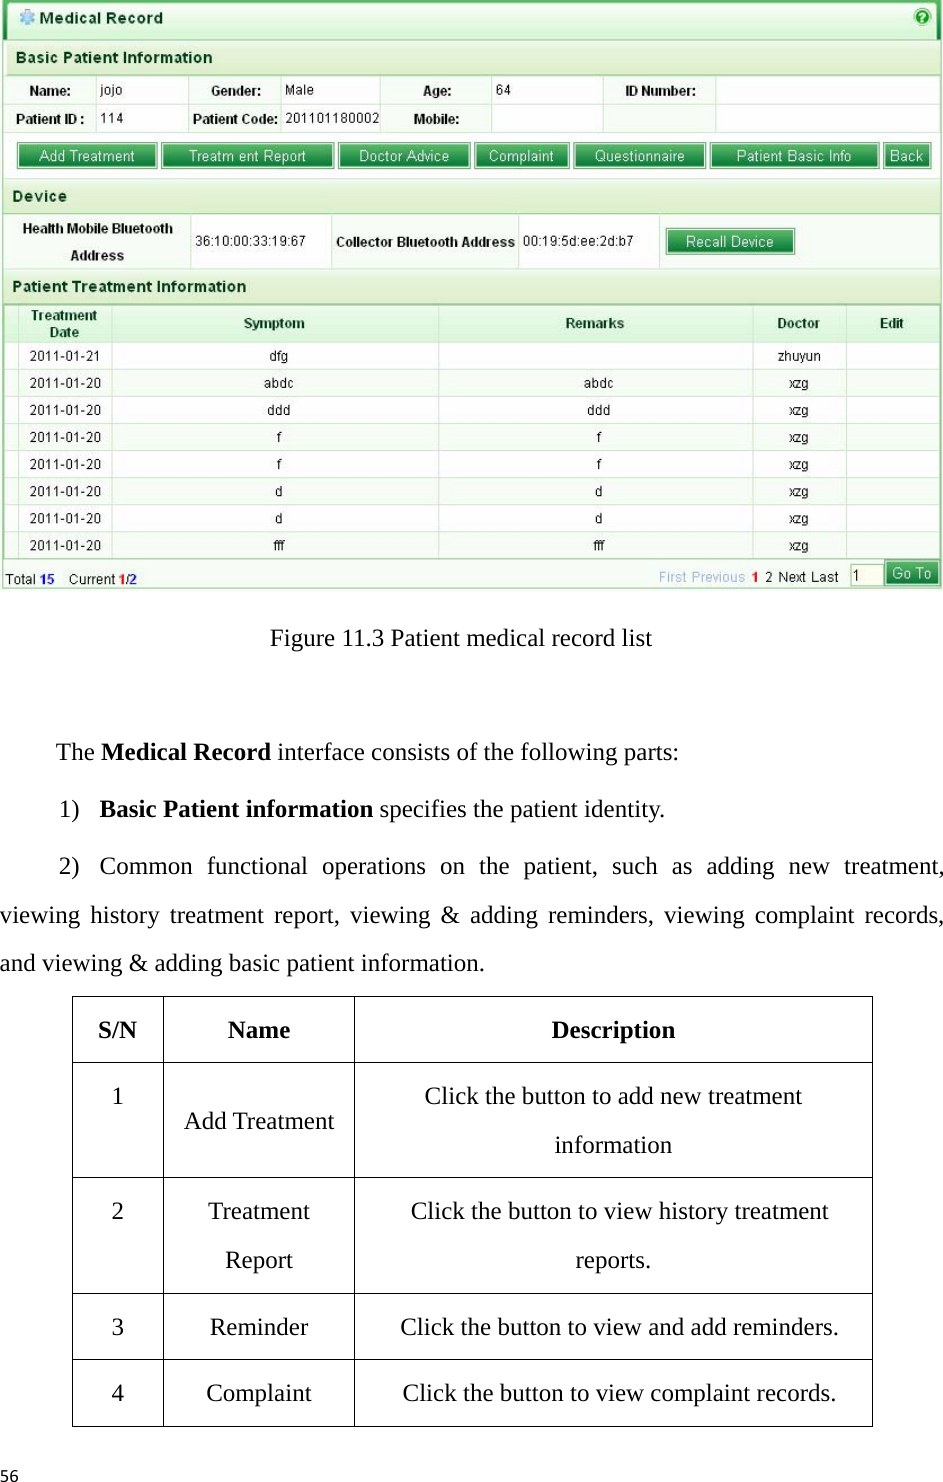 56 Figure 11.3 Patient medical record list  The Medical Record interface consists of the following parts:   1)  Basic Patient information specifies the patient identity.   2)  Common functional operations on the patient, such as adding new treatment, viewing history treatment report, viewing &amp; adding reminders, viewing complaint records, and viewing &amp; adding basic patient information.   S/N Name Description 1  Add Treatment  Click the button to add new treatment information 2 Treatment Report   Click the button to view history treatment reports.  3  Reminder    Click the button to view and add reminders.   4  Complaint    Click the button to view complaint records.   